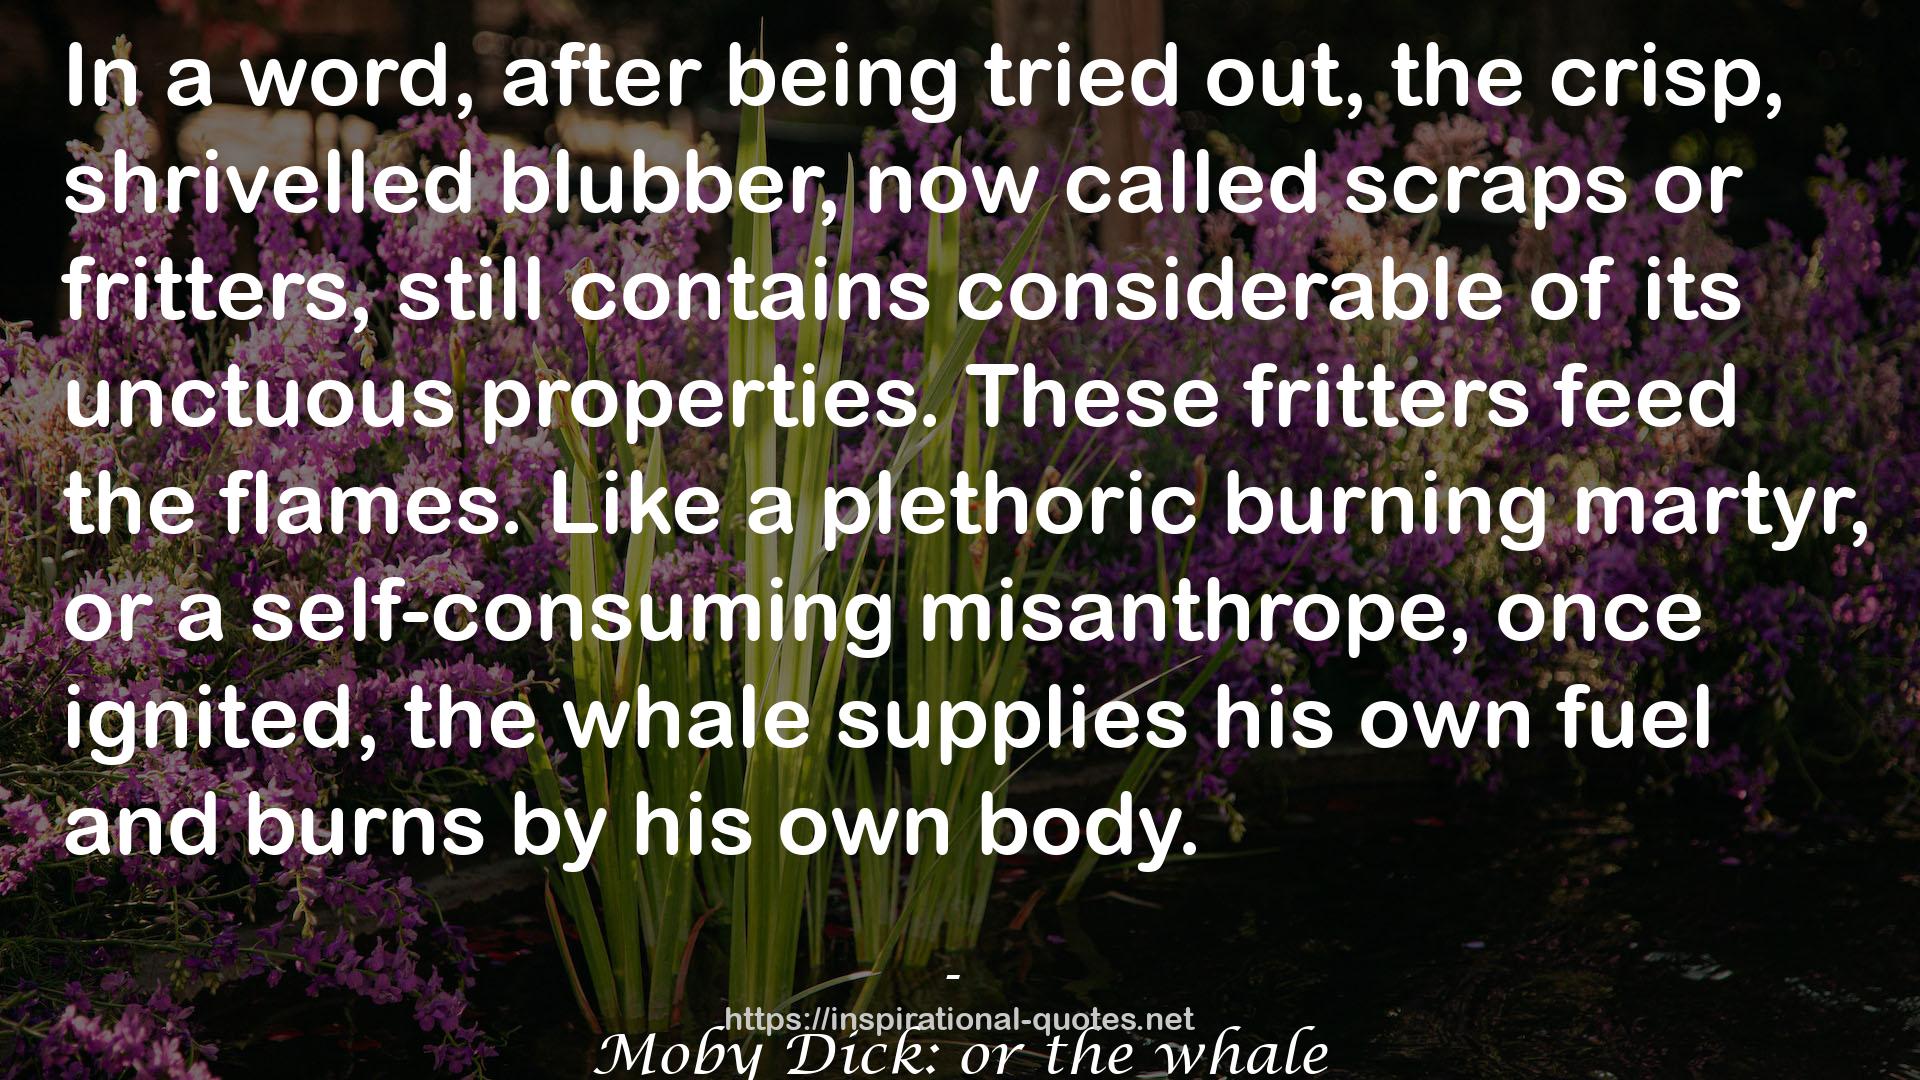 Moby Dick: or the whale QUOTES